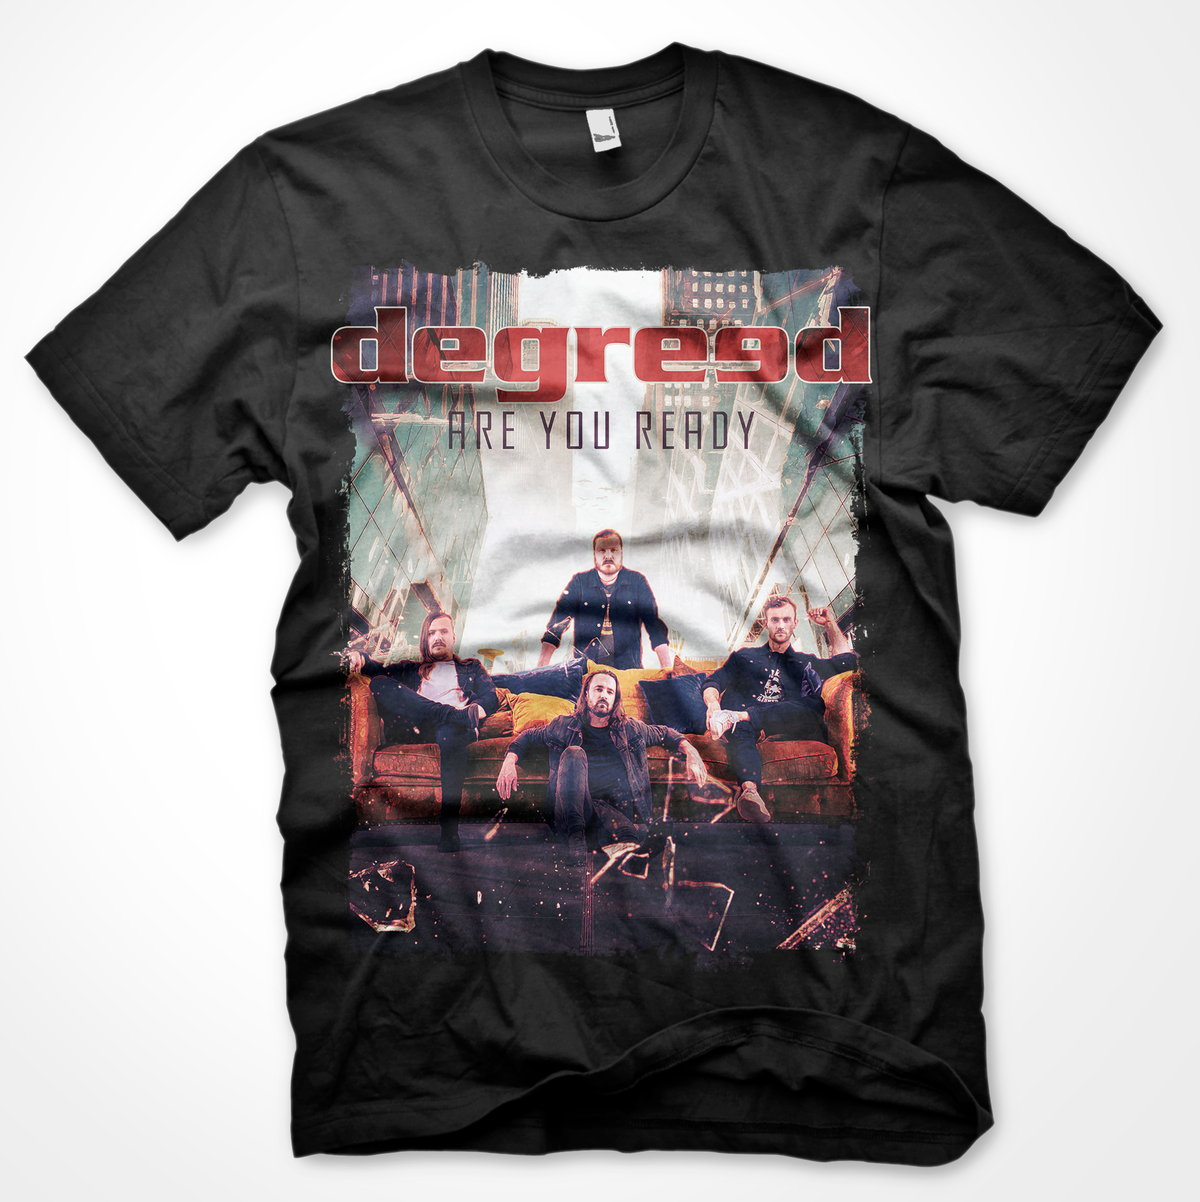 Image of "Are You Ready" artwork T-Shirt